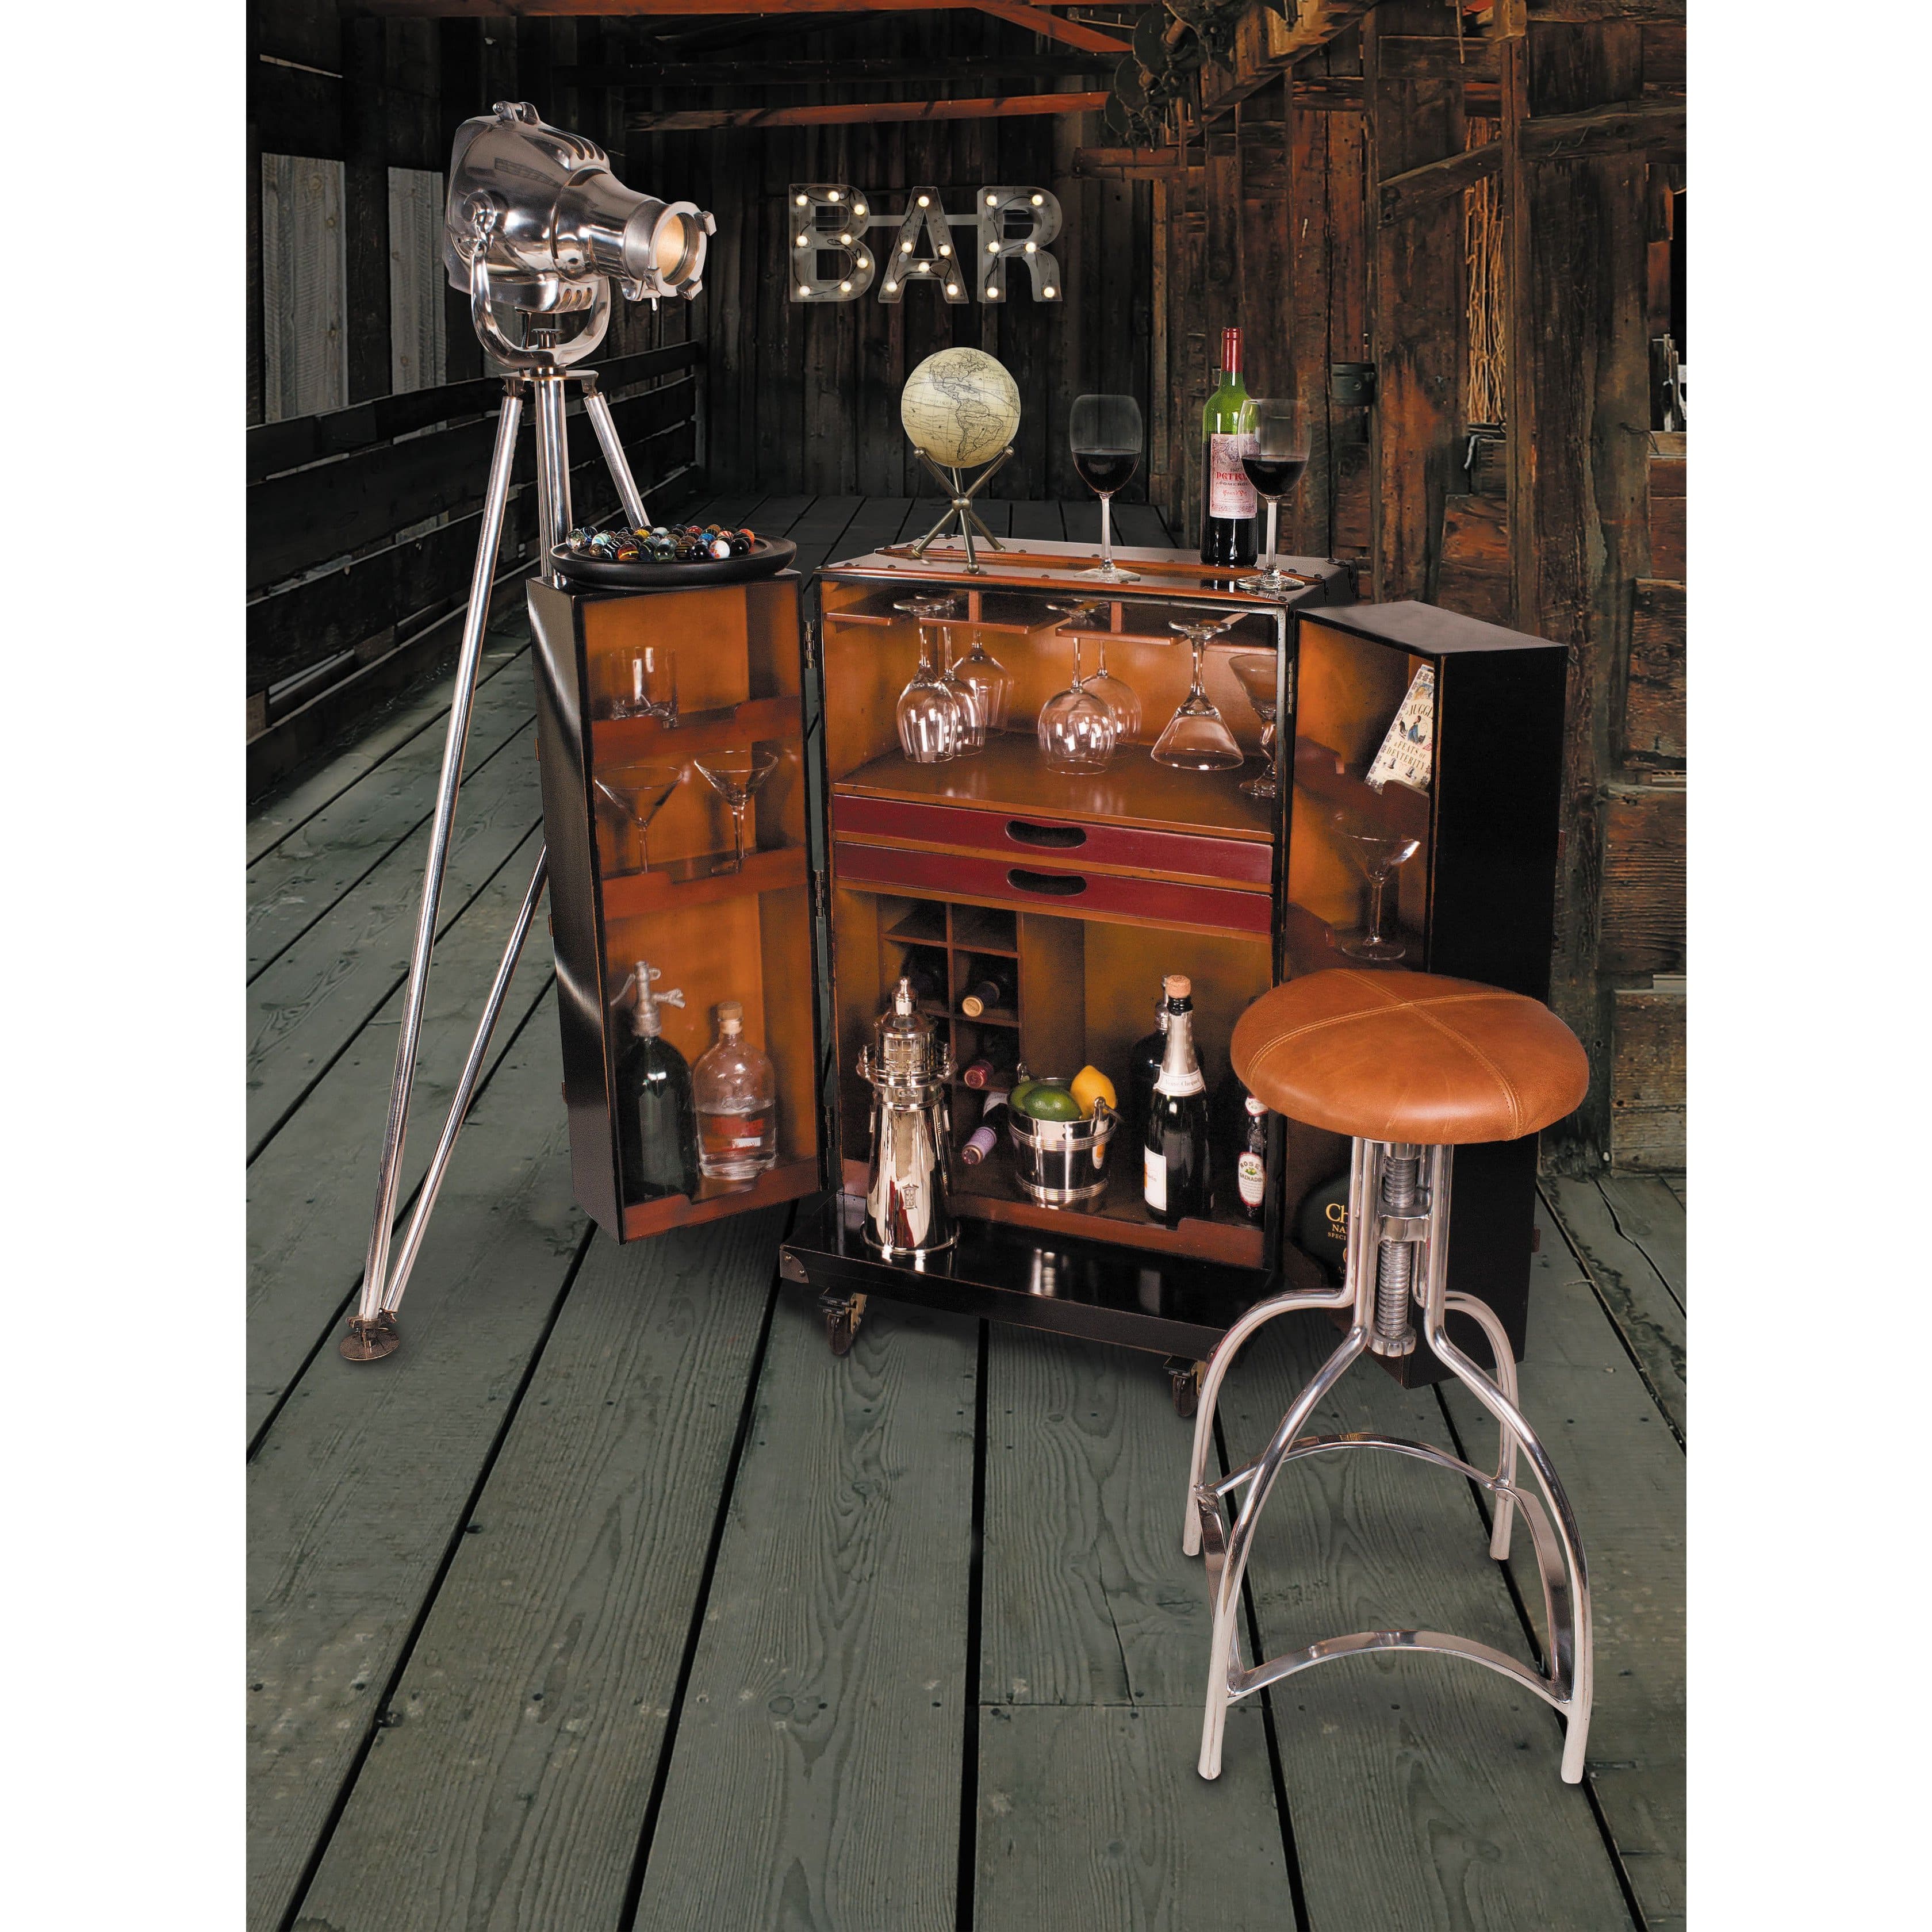 Authentic Models Polo Club Bar Black Buy Online Express Home Bars